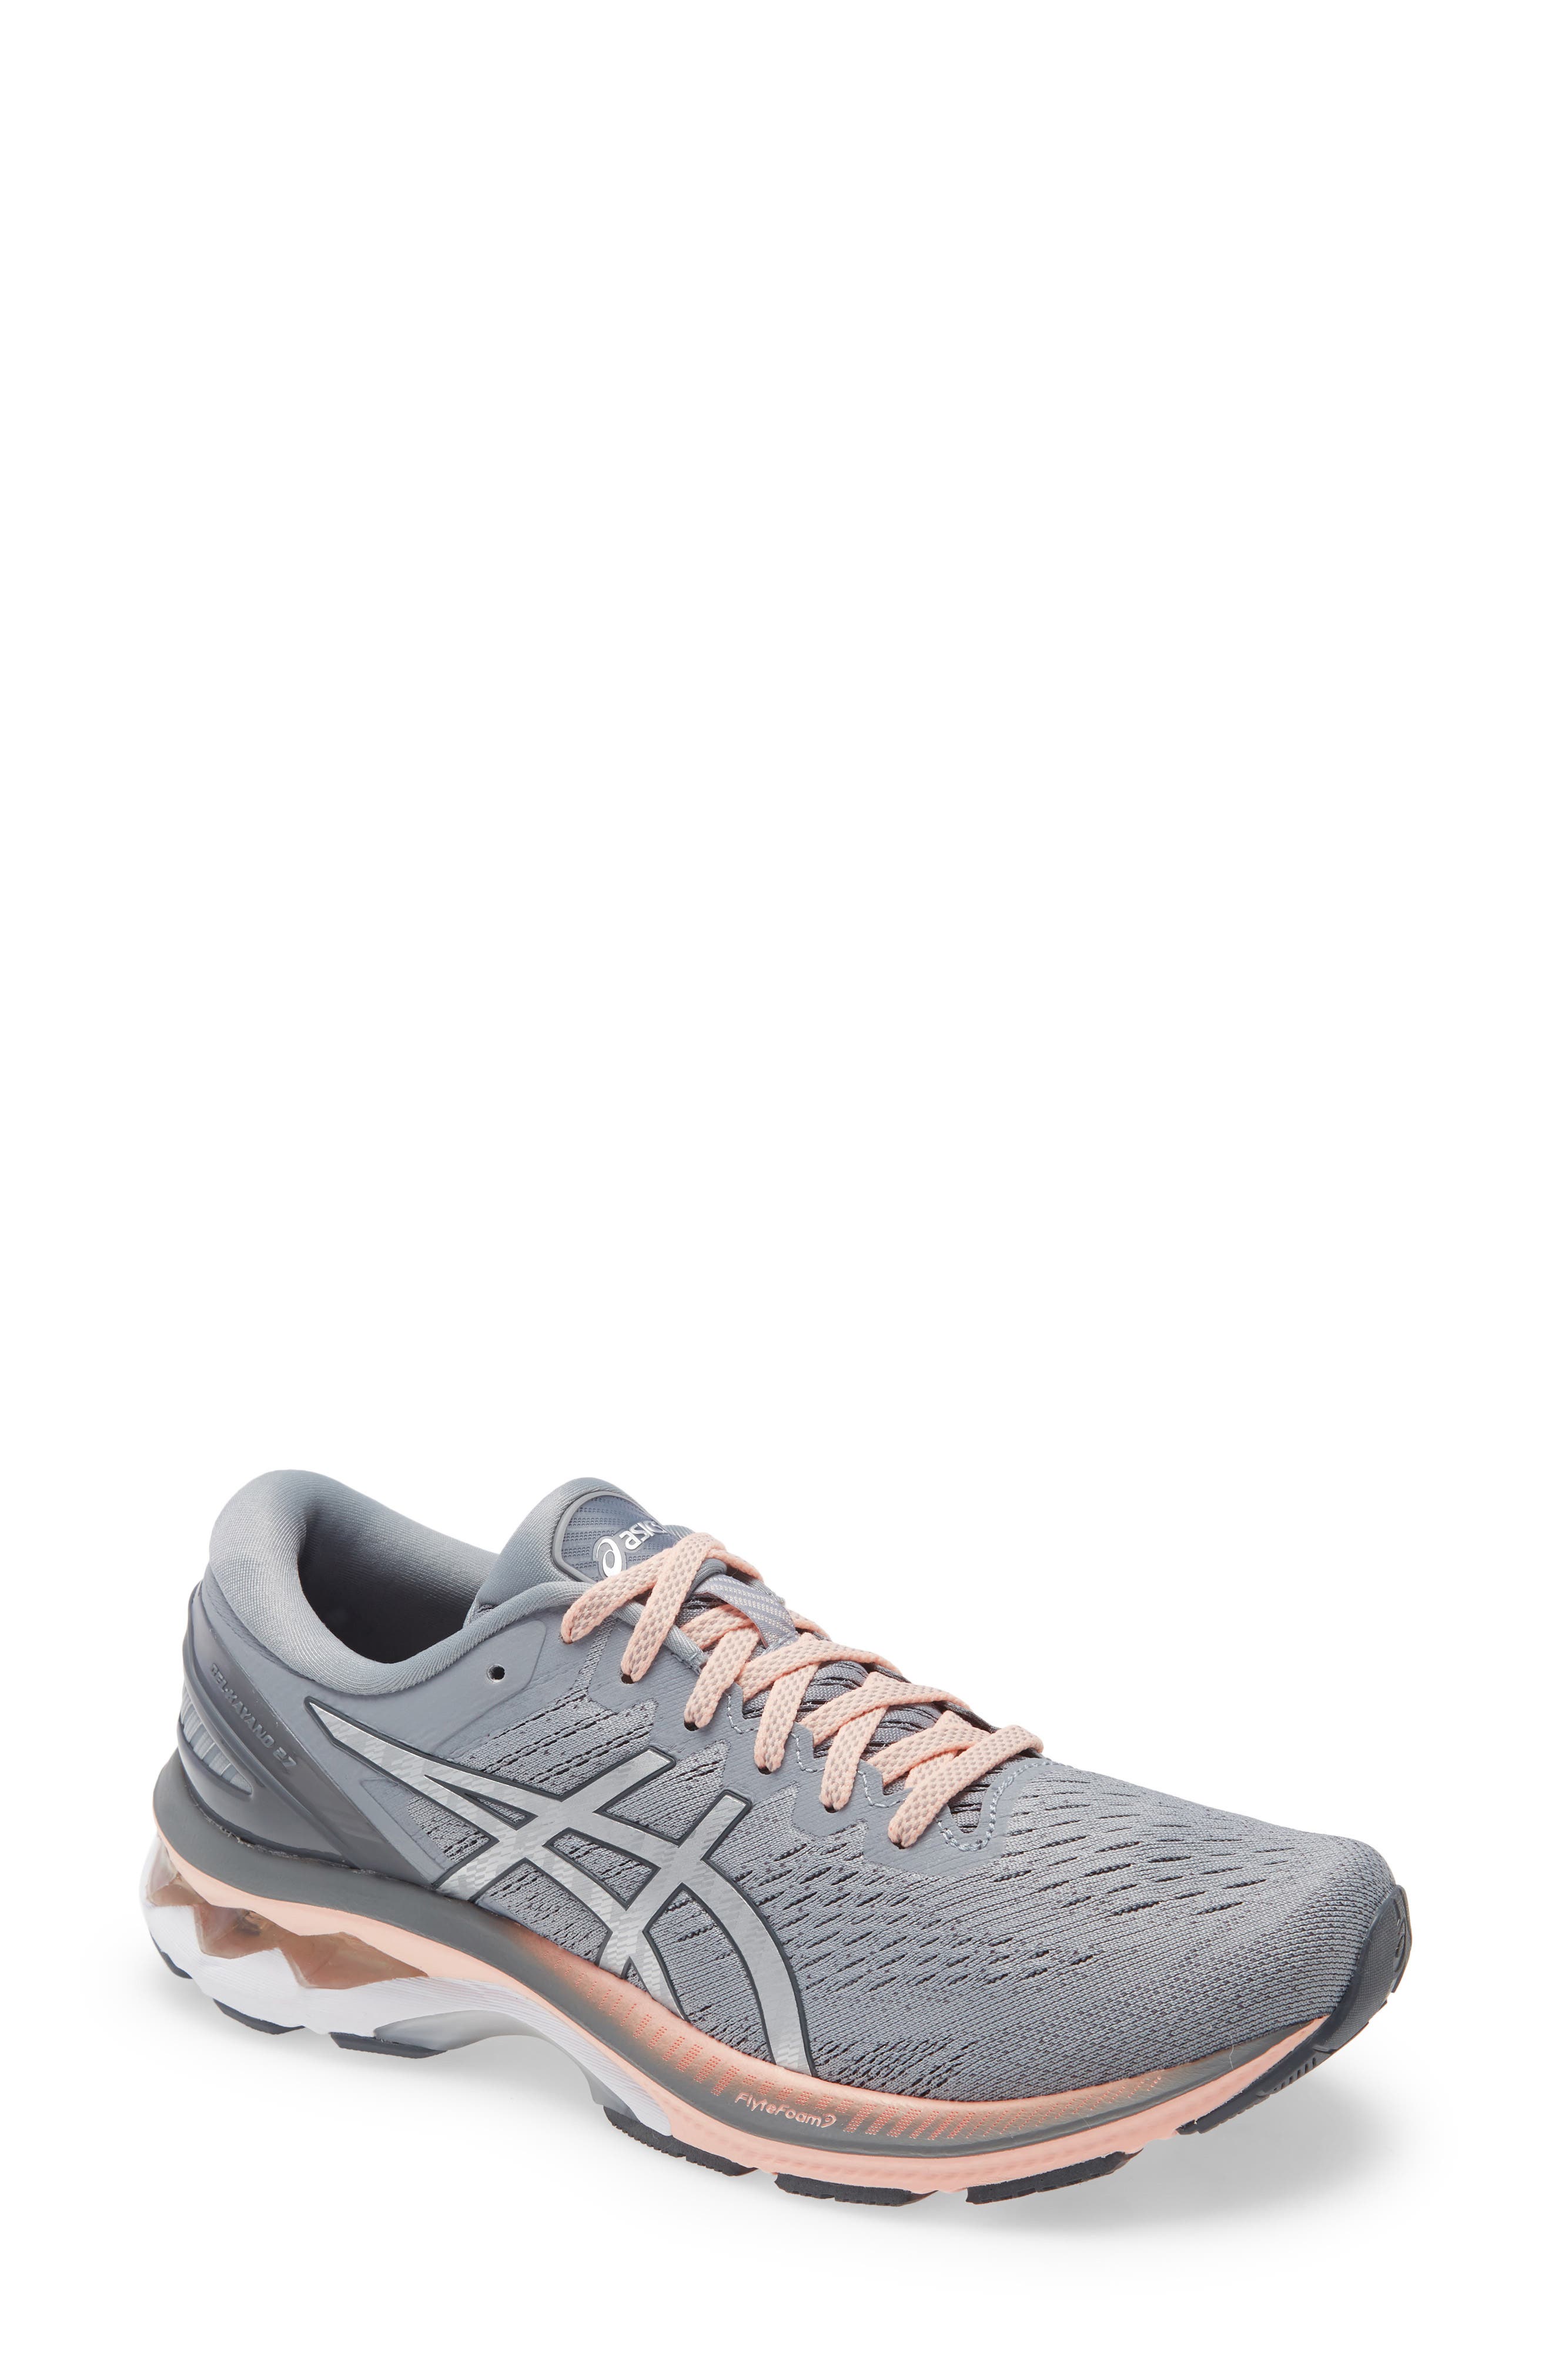 asics shoes womens Brown